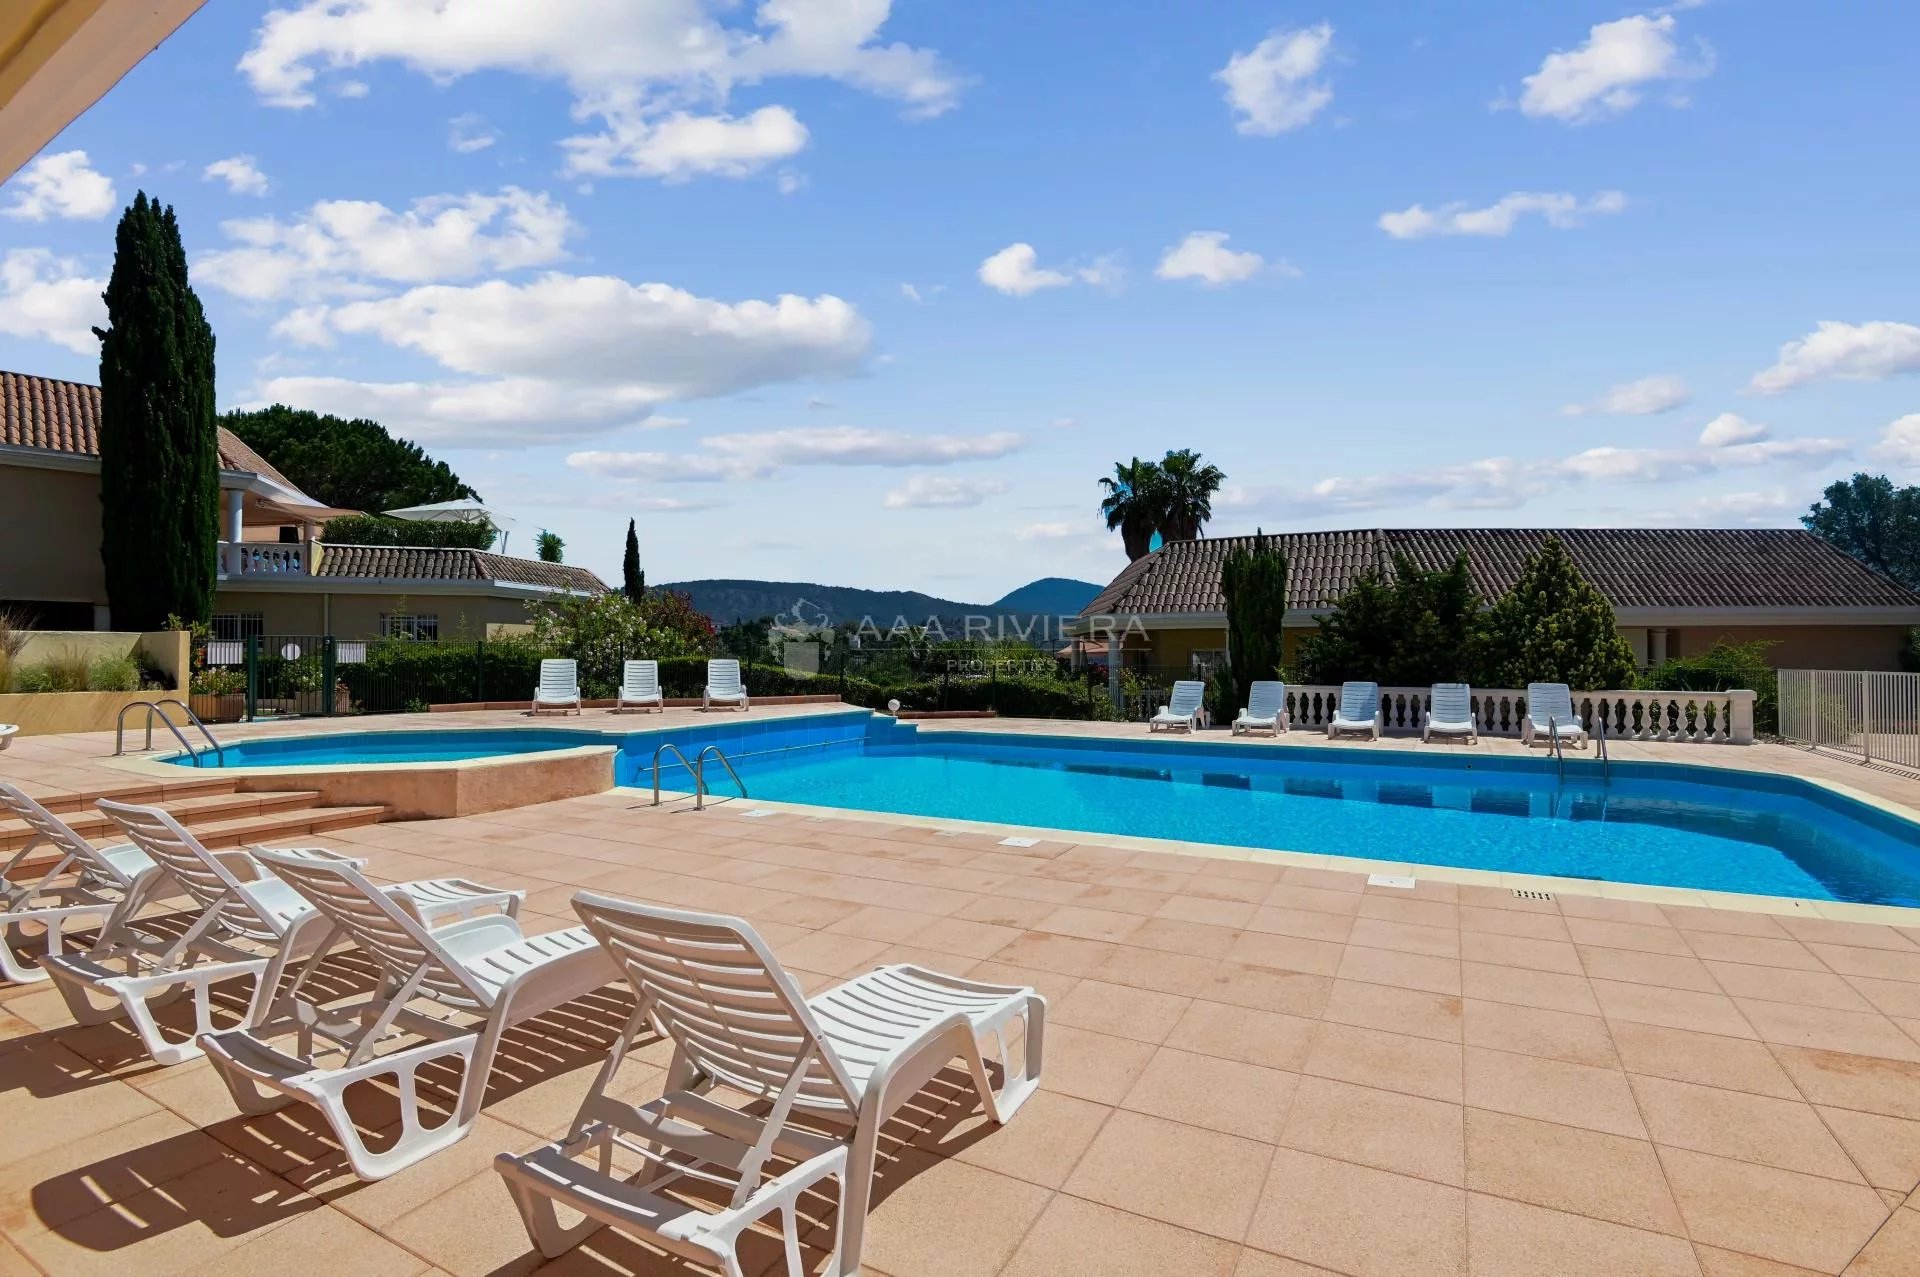 SOLD - SOLE AGENT - Mandelieu close to Cannes - Lovely 3 bed garden apartment. View, pool,  caretaker.